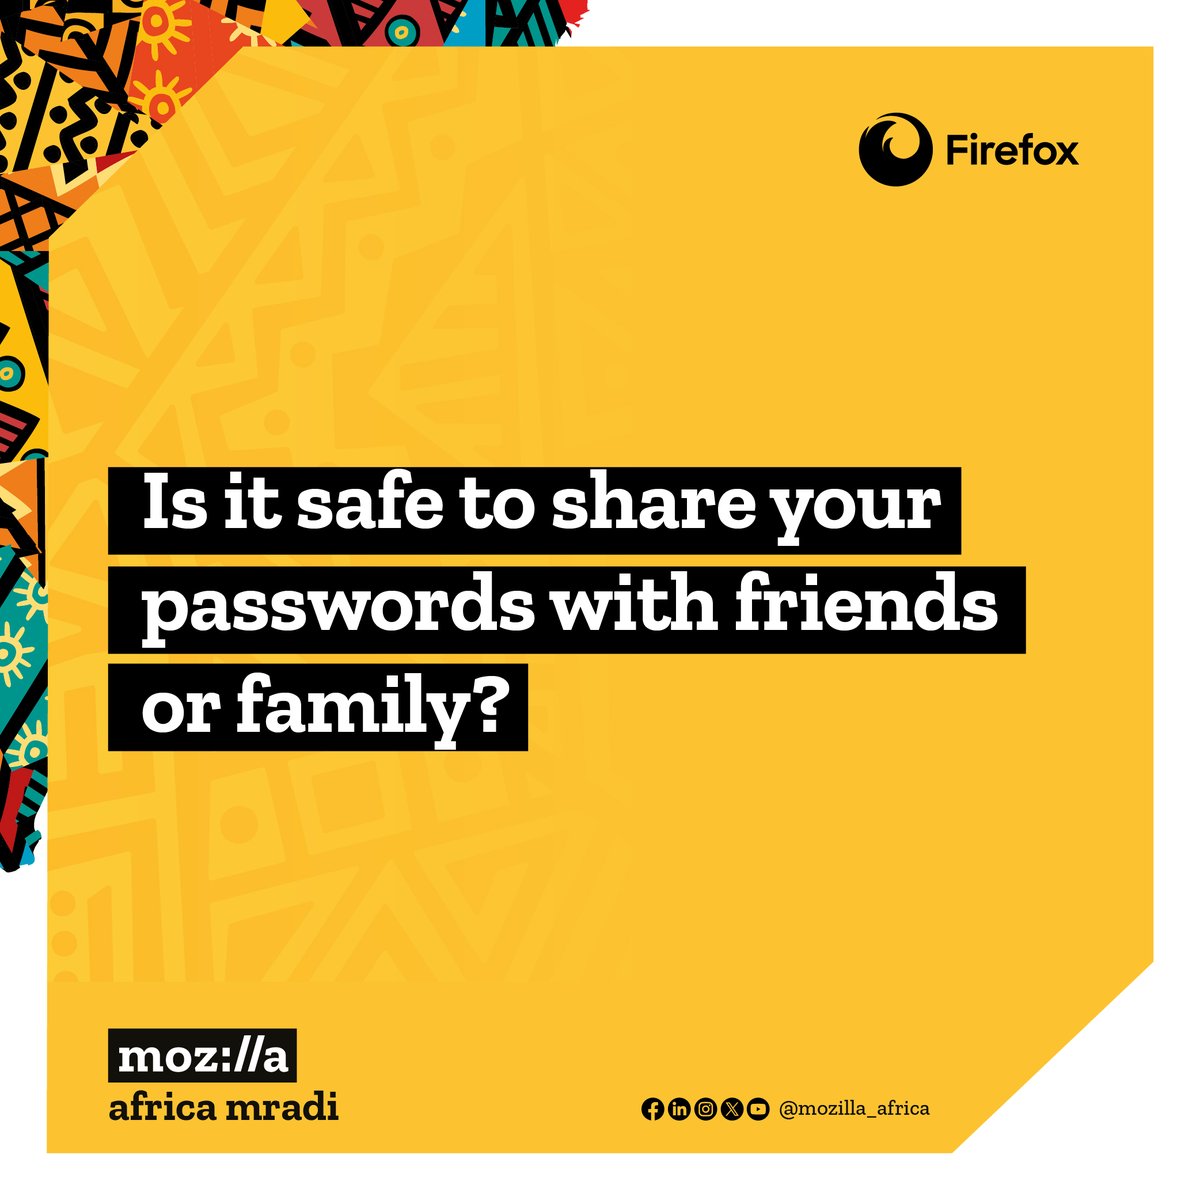 In today's connected world, it's crucial to ask yourself: How safe are you online? 

Join Firefox as we explore tips about your #OnlineSafety and keep your digital identity secure.

Swipe left, tell us your answers in the comments section.

#MozillaAfricaMradi #Firefox